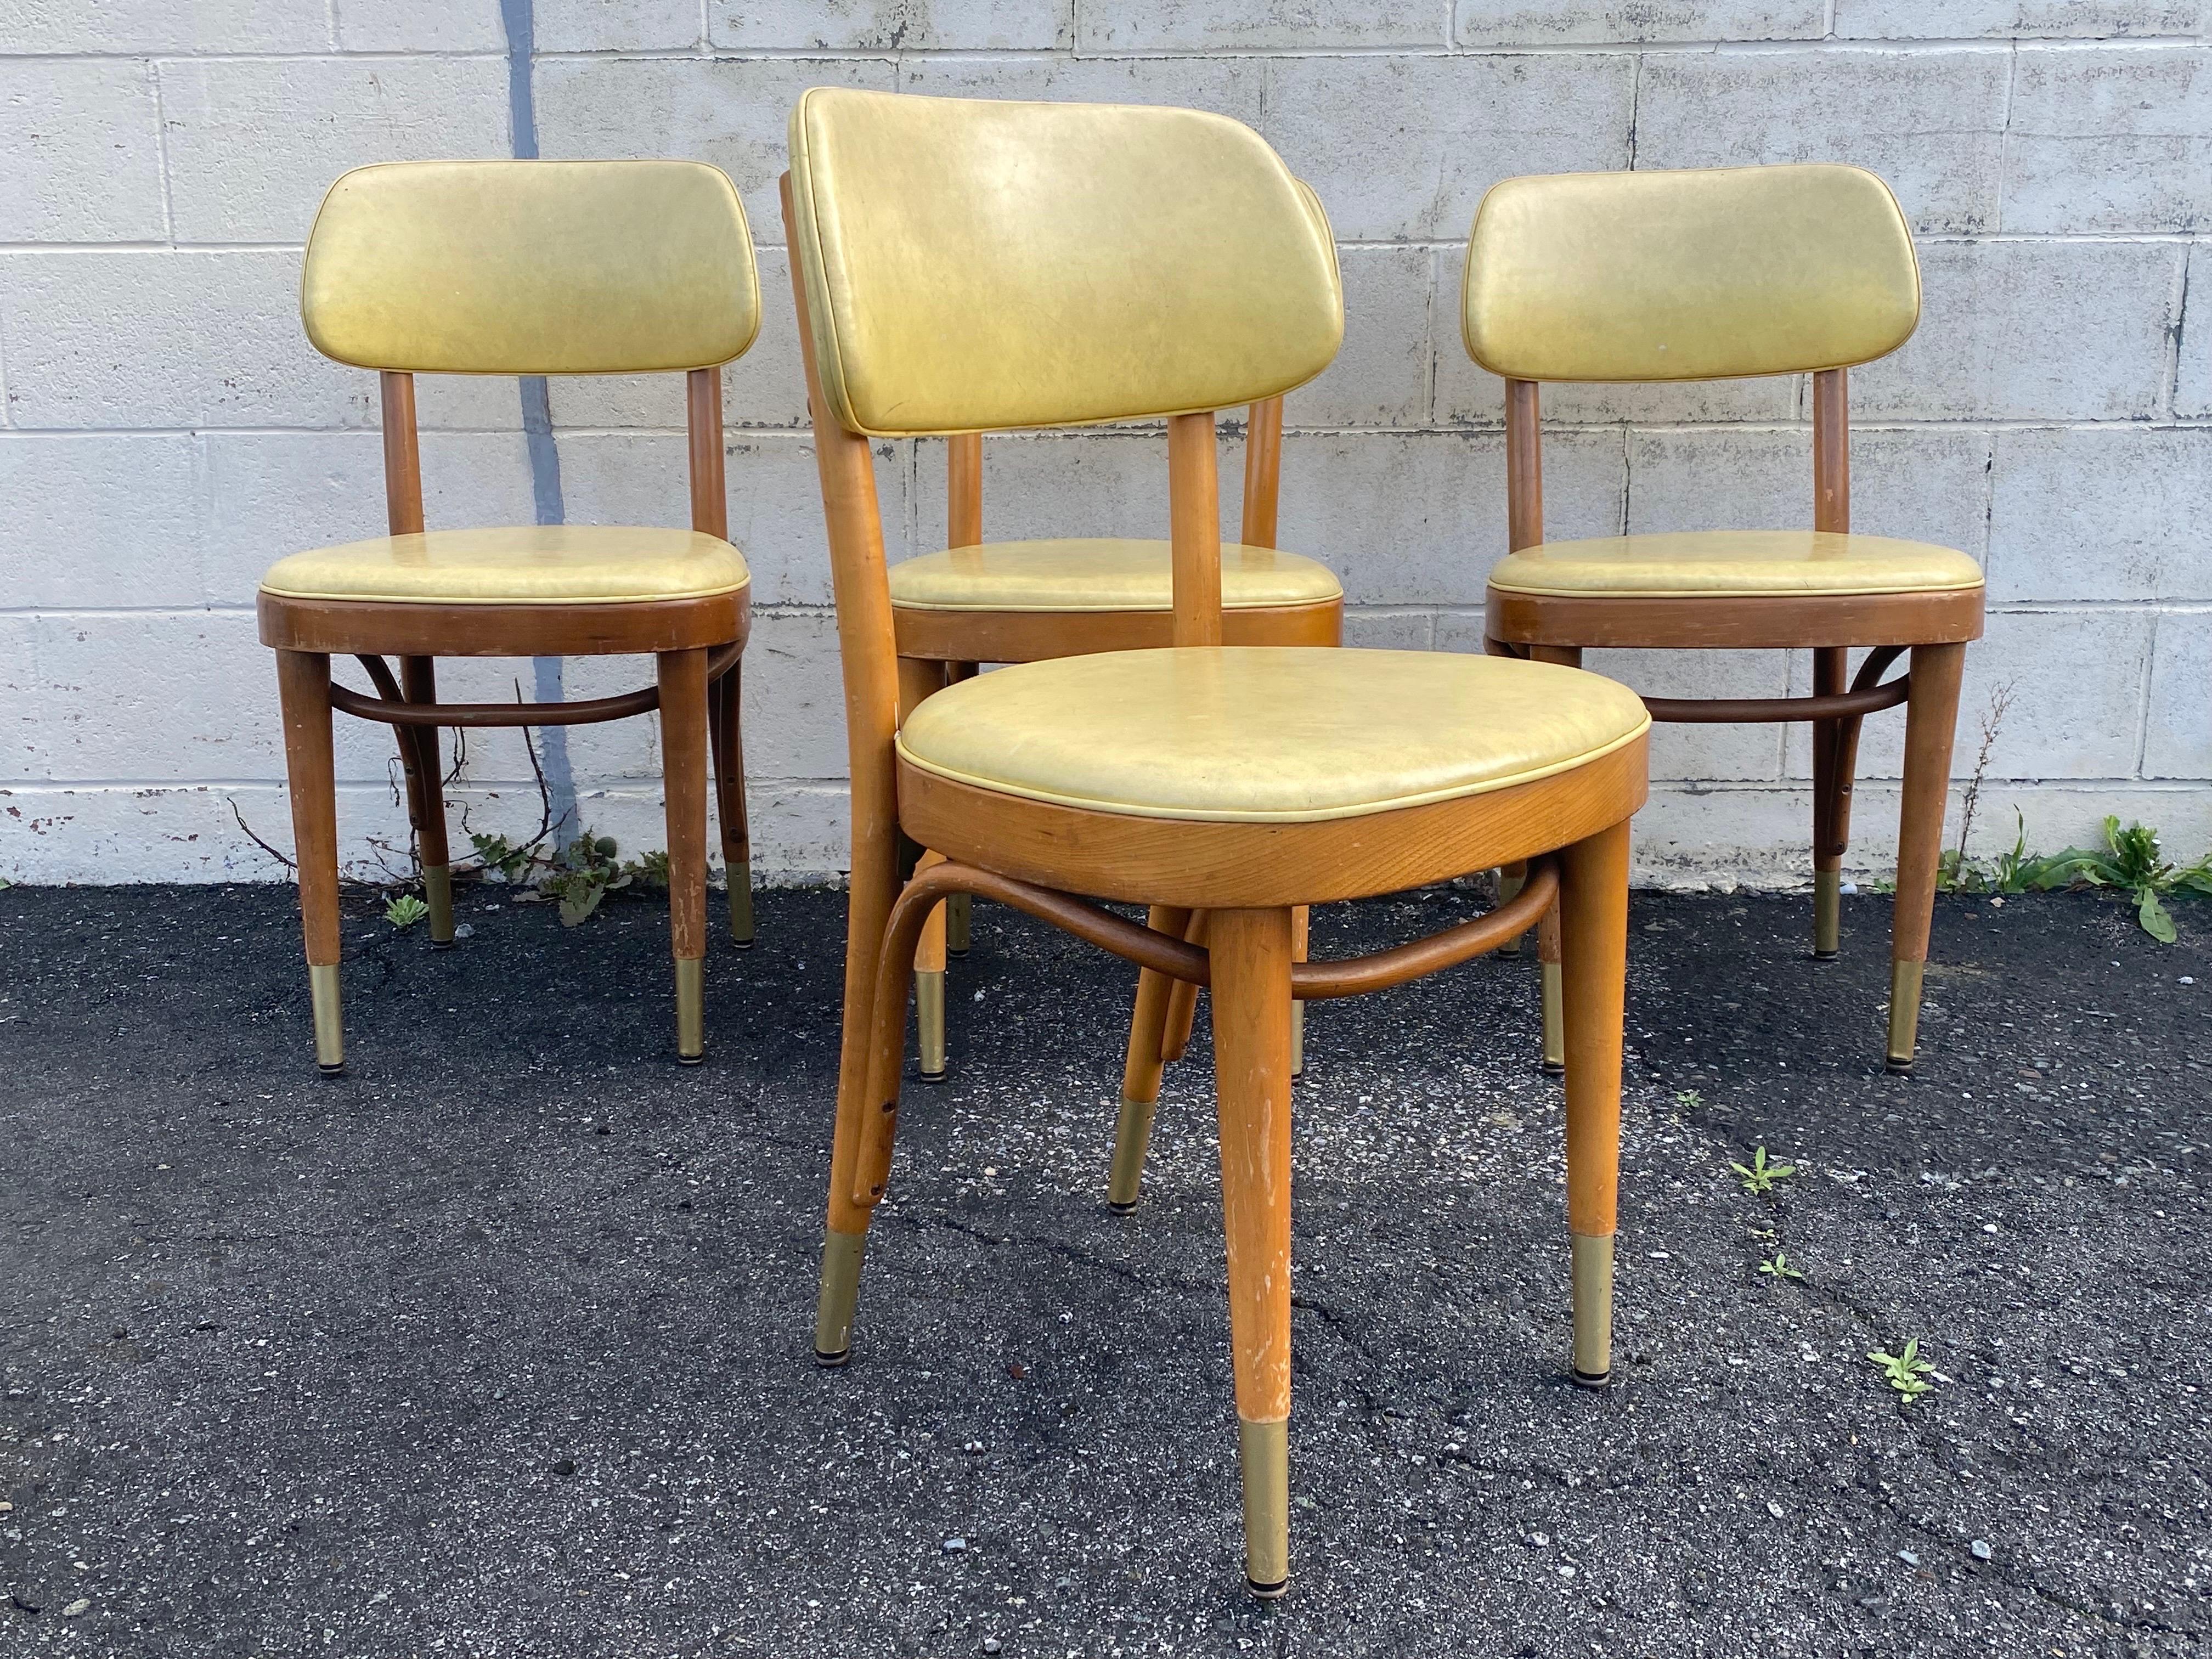 Very cool set of Mid-Century Modern bentwood chairs made by Thonet. These chairs come with its original yellow vinyl upholstery and brass accent feet. An excellent modern timepiece, don't miss out !